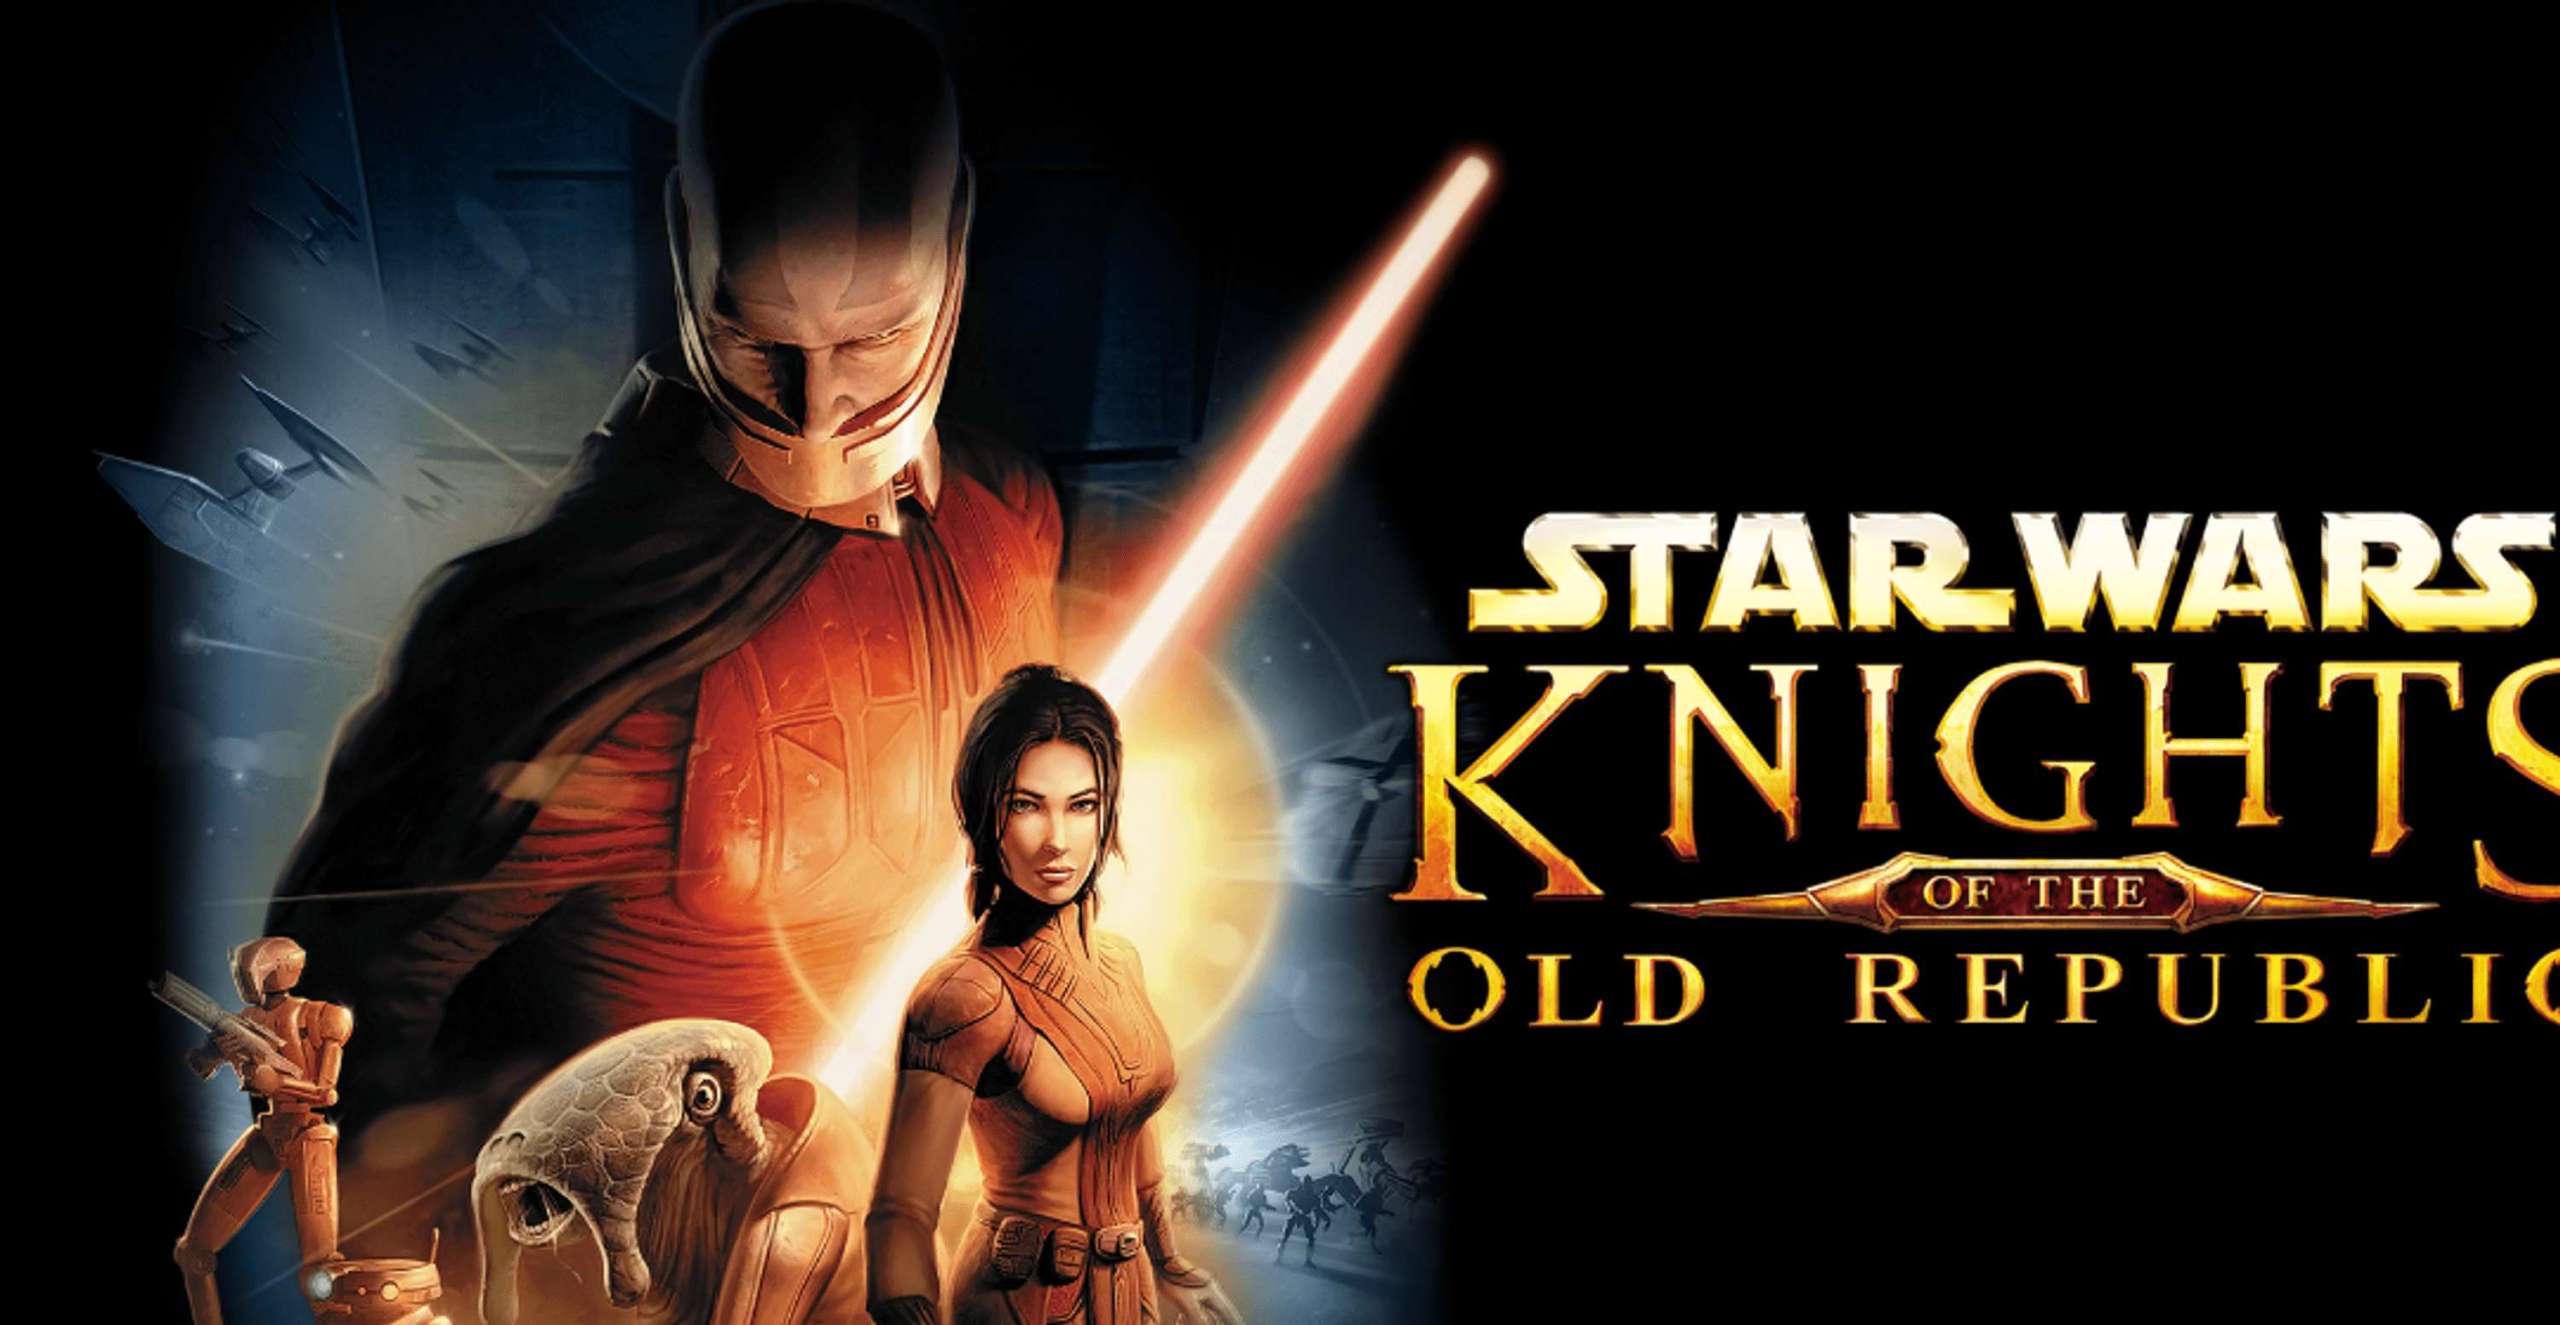 The Unofficial Fan-Produced Series Based On Star Wars: Knights Of The Old Republic: Episode One